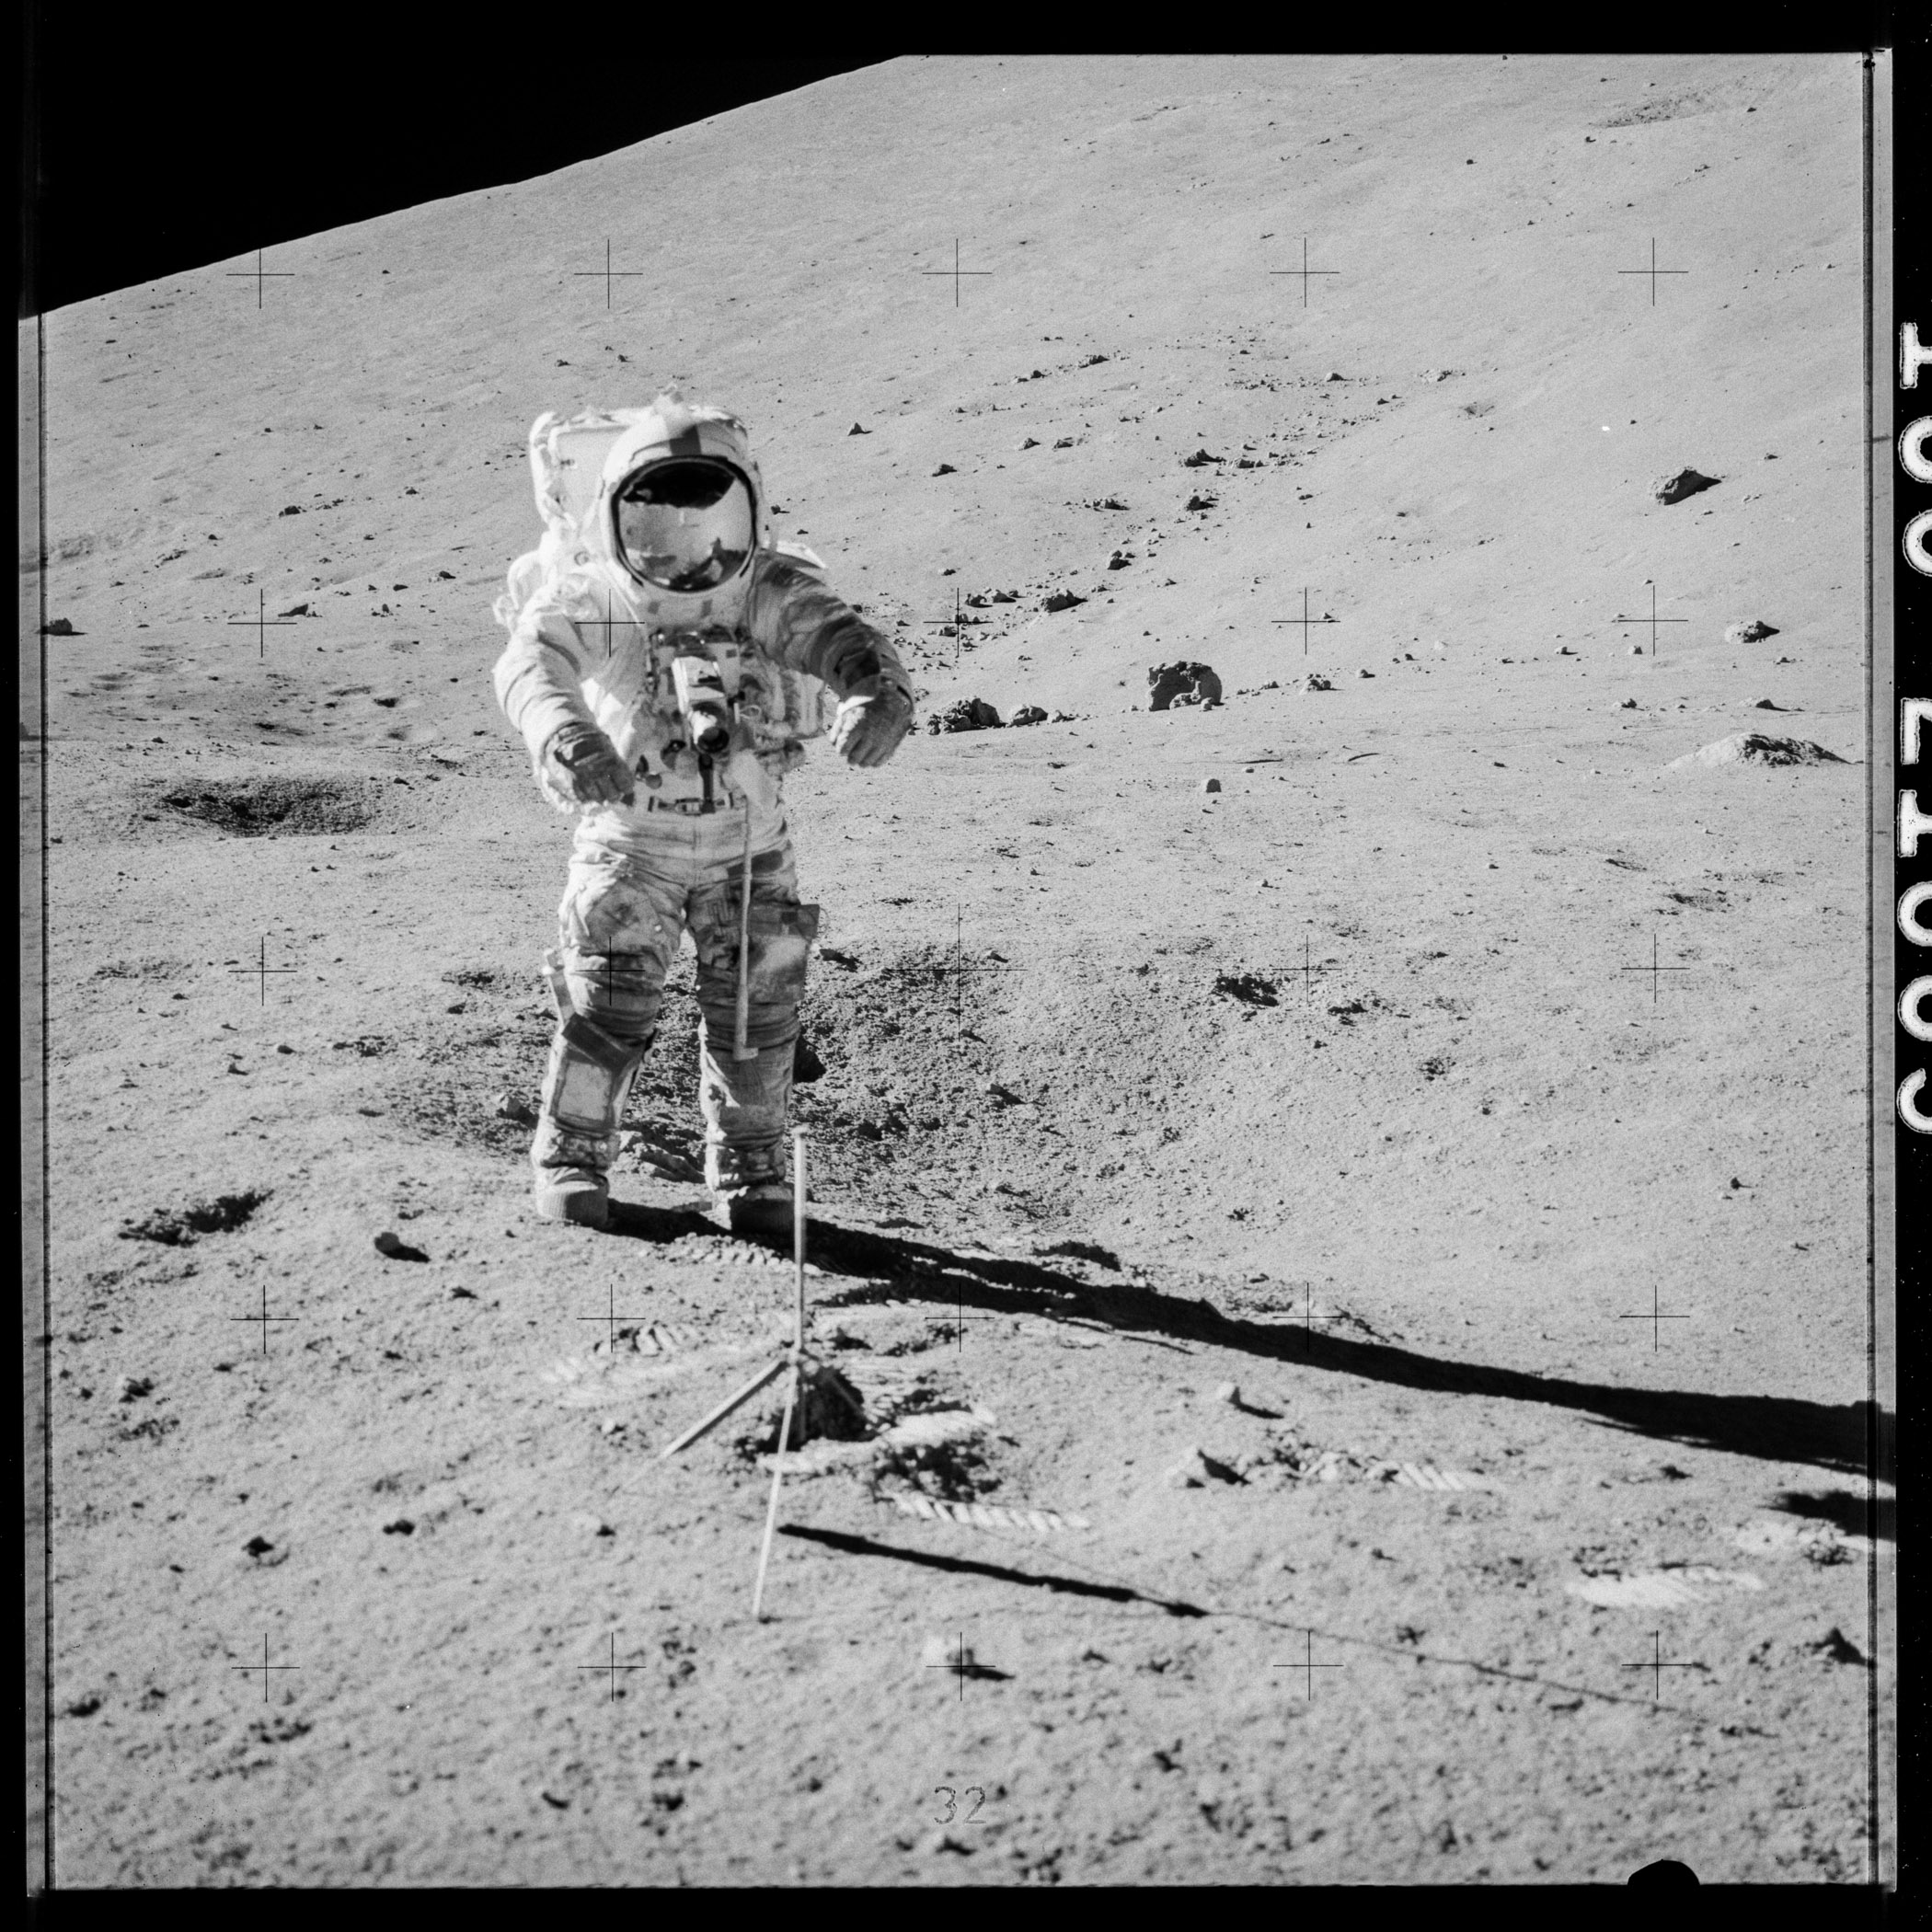 Photo of astronaut on the Moon digging into the surface.